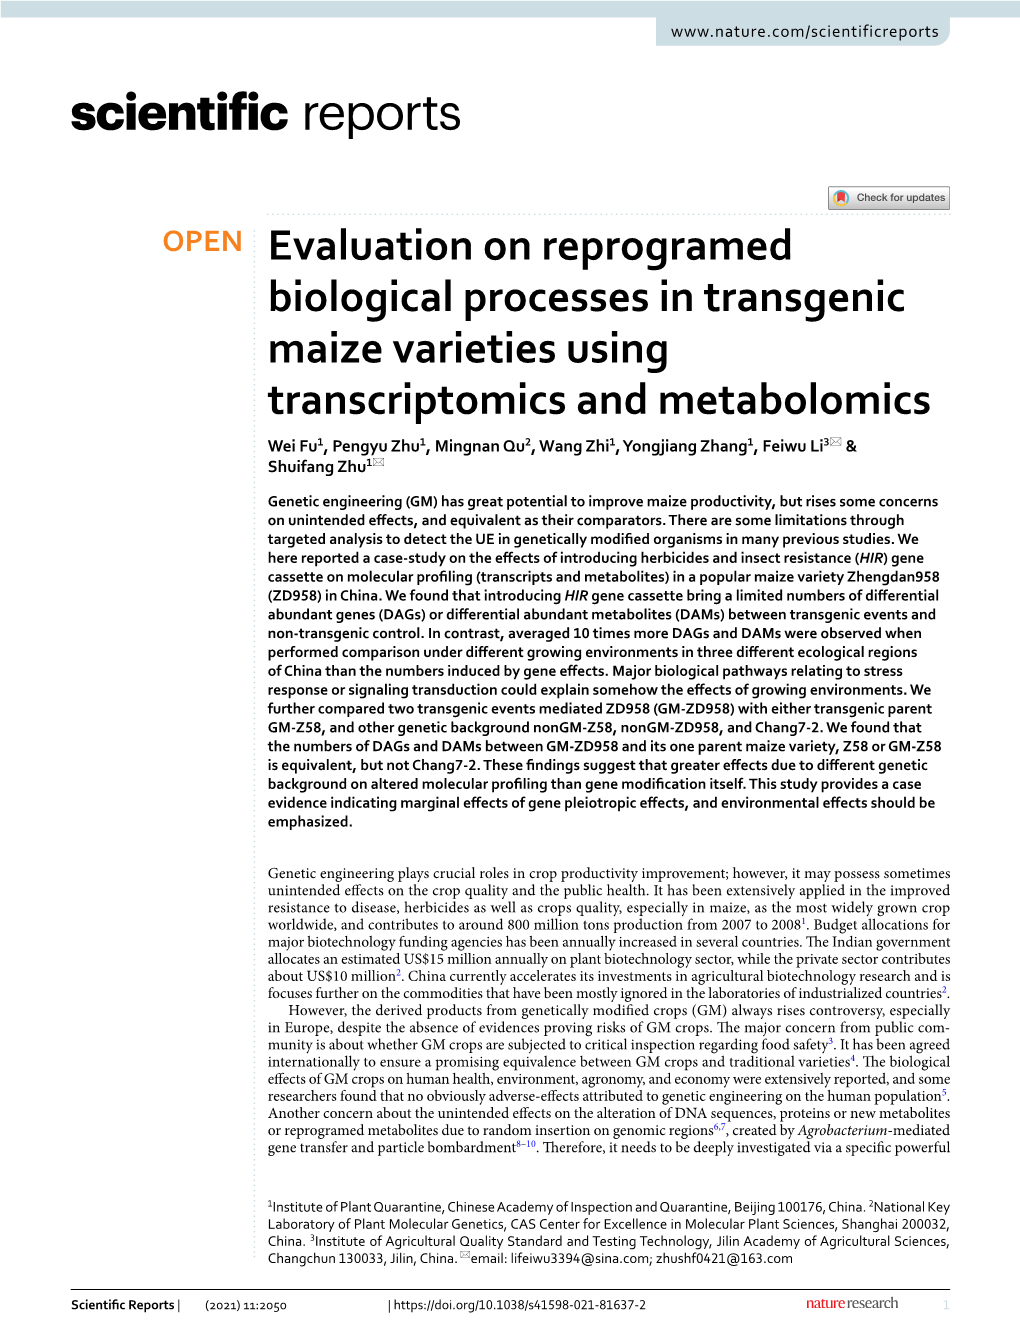 Evaluation on Reprogramed Biological Processes in Transgenic Maize